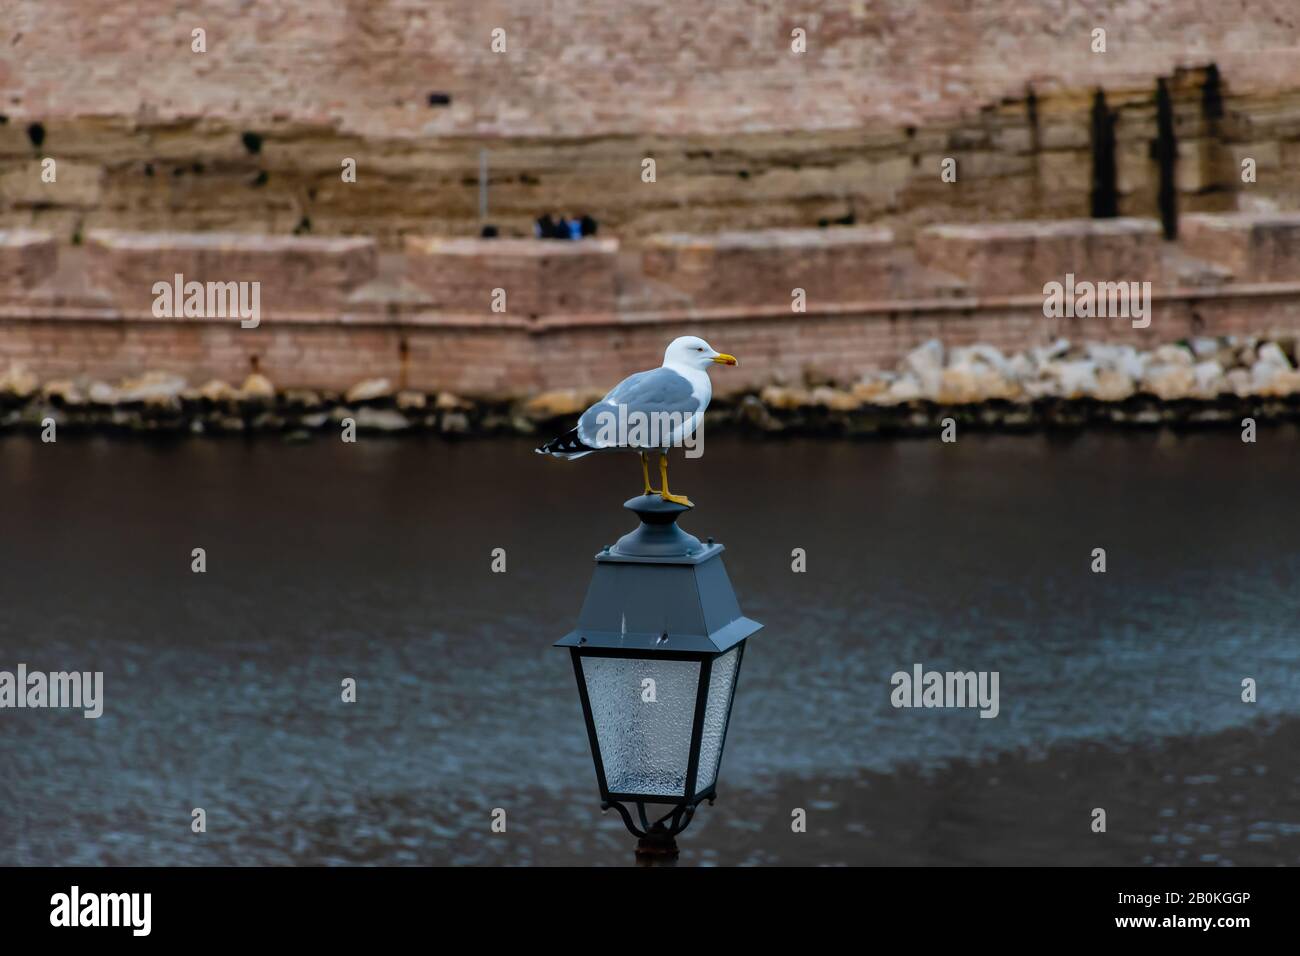 A seagull bird with a red spot on its beak sitting on a lantern near the Pharo Palace in a park with the Mediterranian sea bay and a fortress stone wa Stock Photo